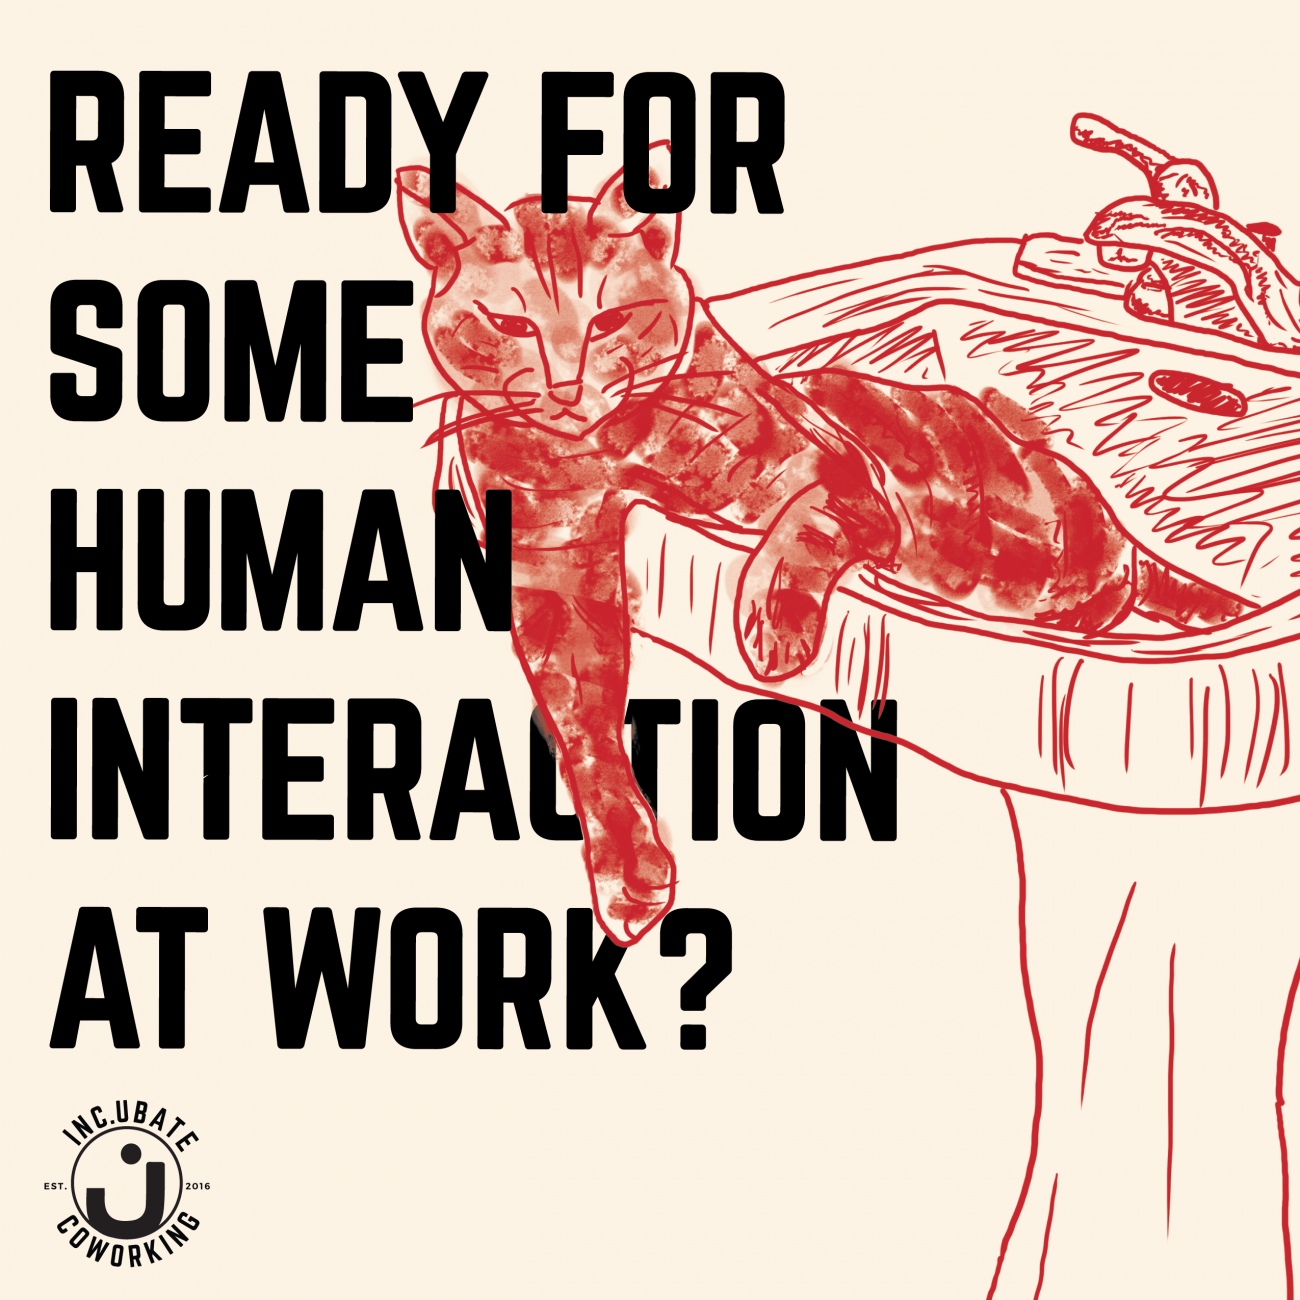 Ready For Some Human Interaction At Work?